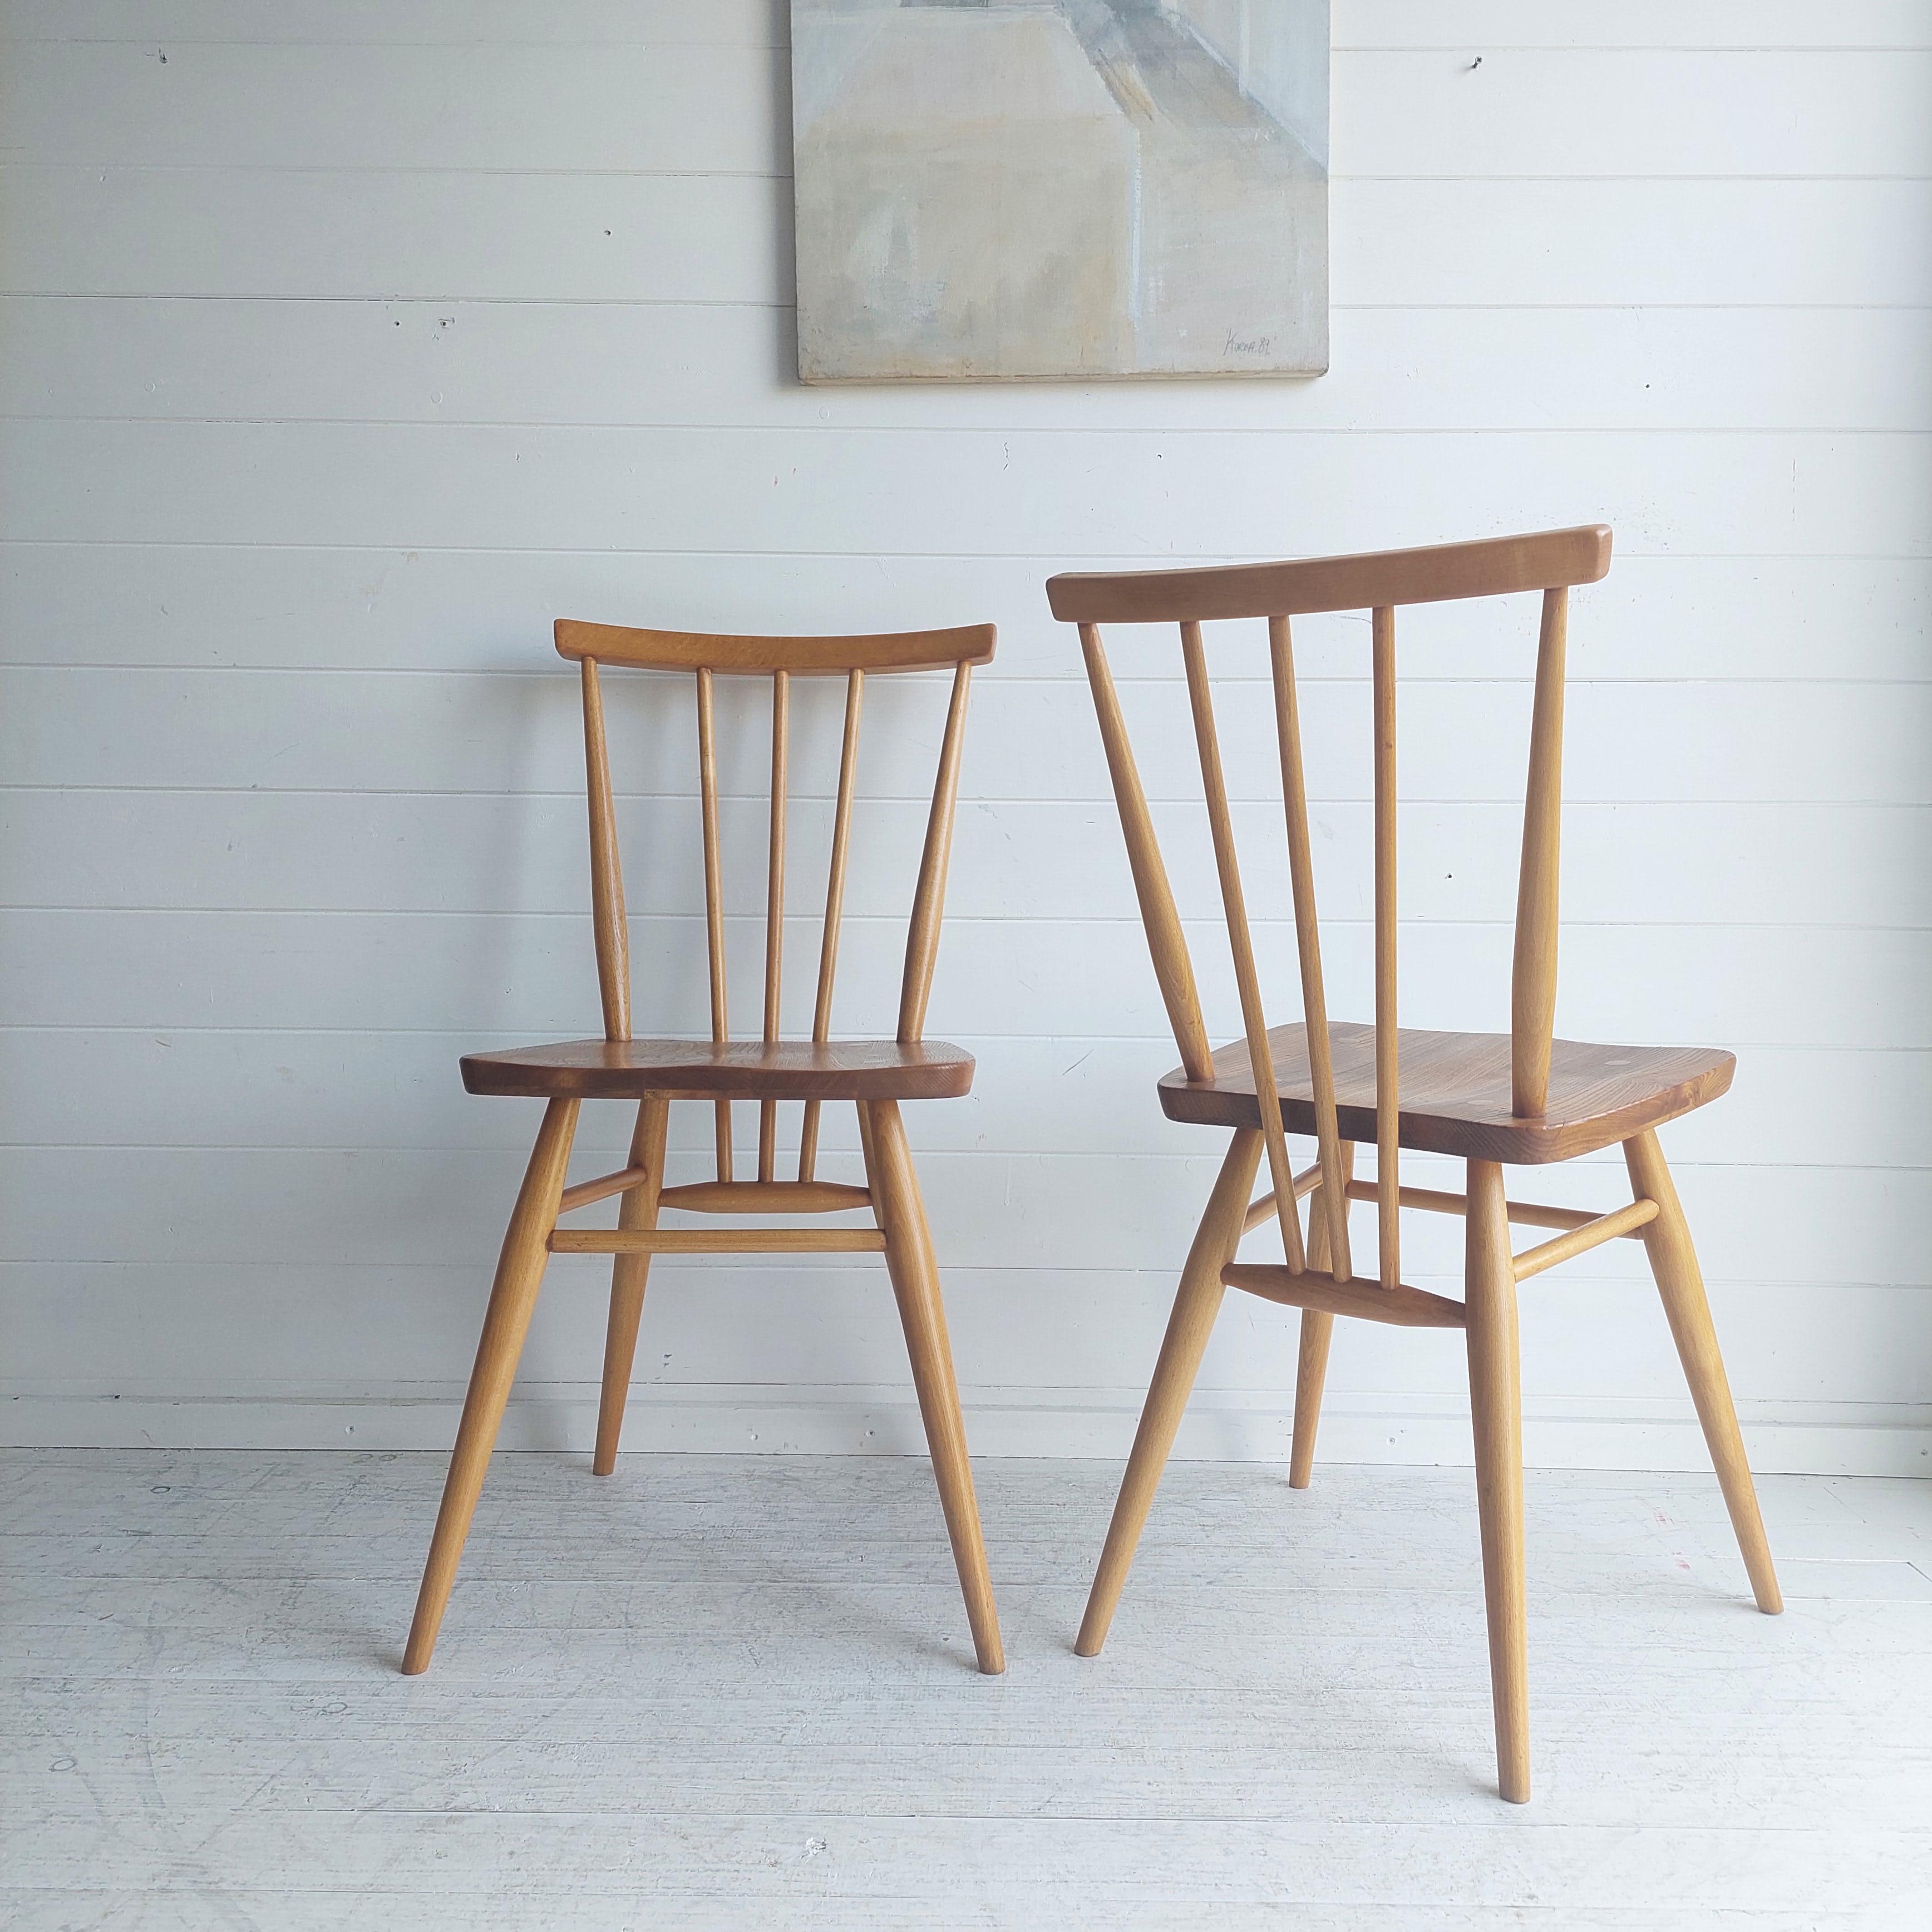 Set of 2 vintage dining / kitchen chairs. Designed by Ercolani and manufactured by Ercol model 391. 
Circa 60s
This classic design in solid elm and beech by Lucian Ercolani is arguably one of his most accomplished and enduring designs that looks as